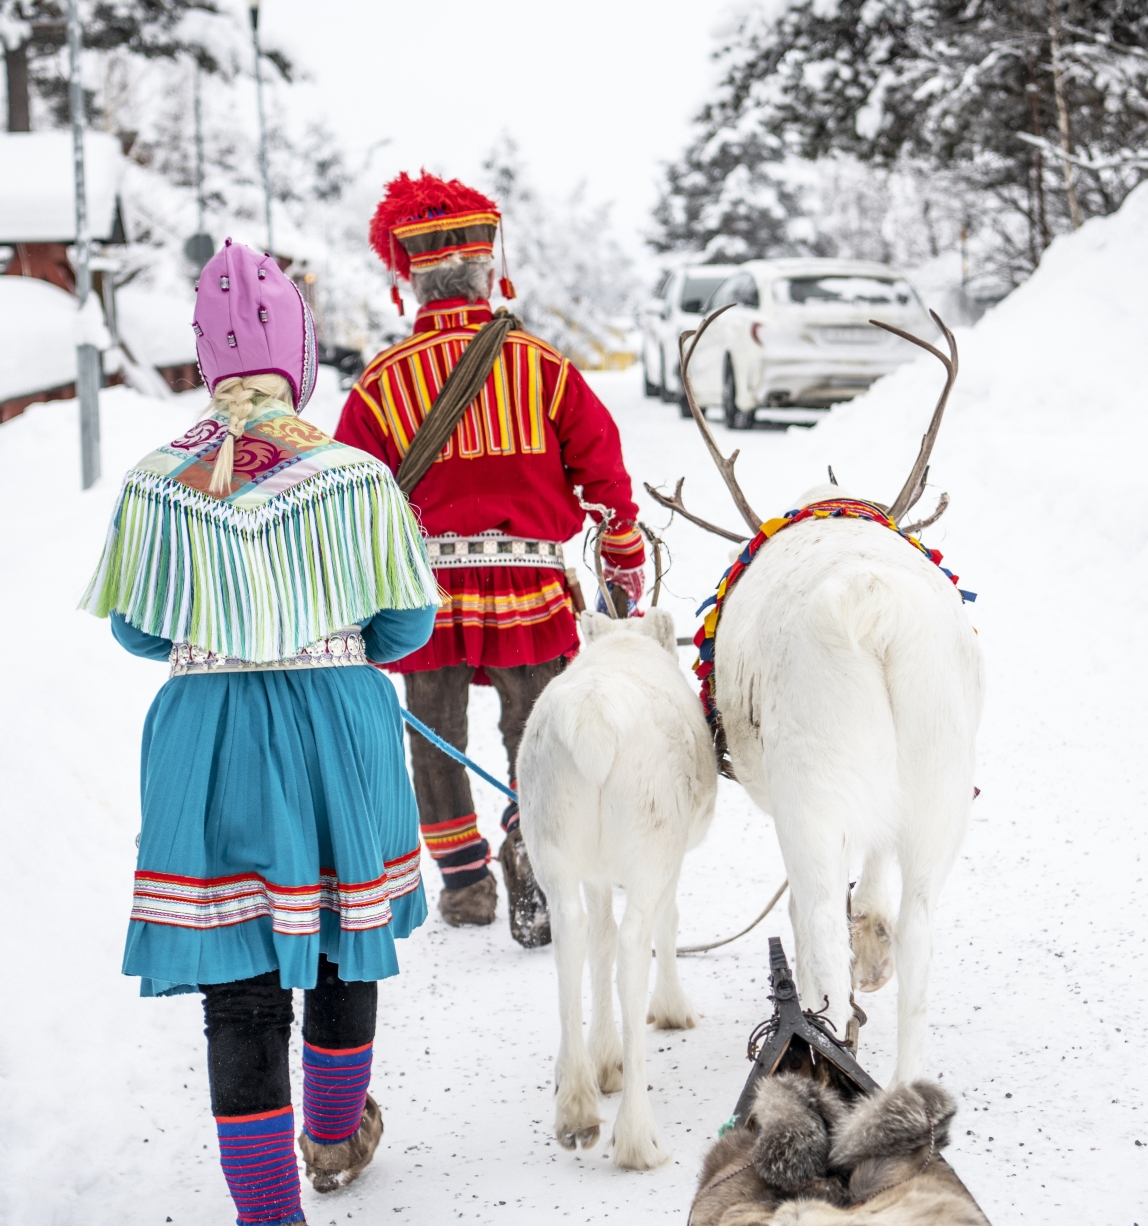 A man and woman in Sami traditional clothing walk in snow alongside bridled reindeer